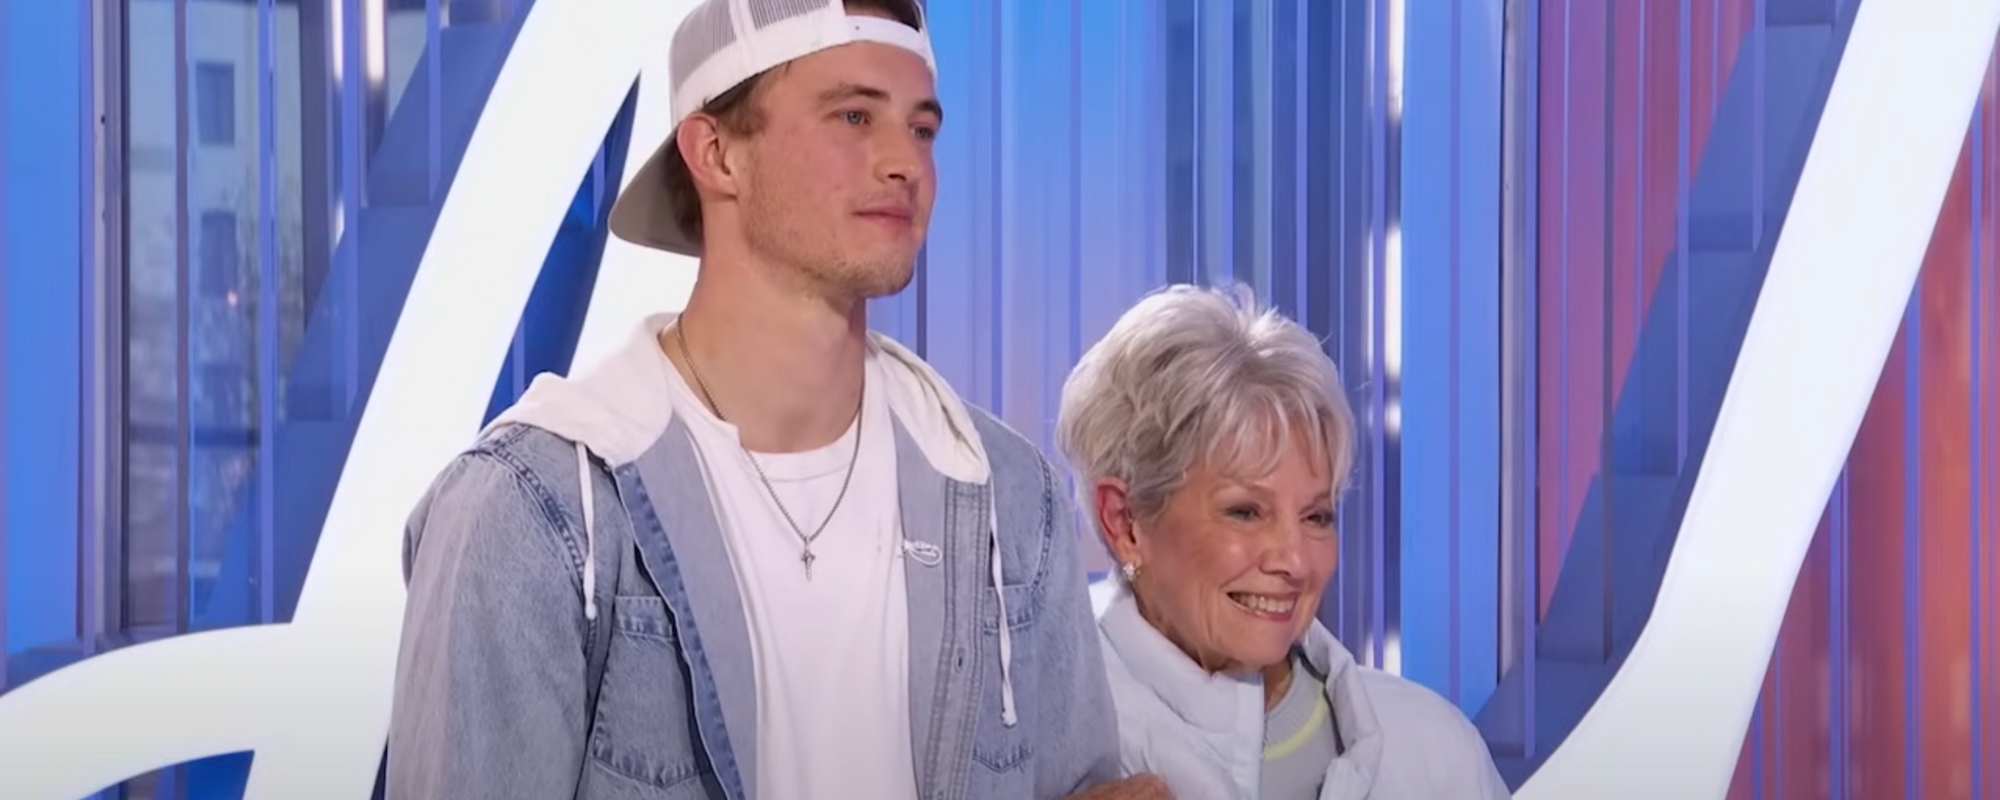 Watch Ex-NFL Player, Son of Super Bowl Champ Take ‘American Idol’ Judges by Storm